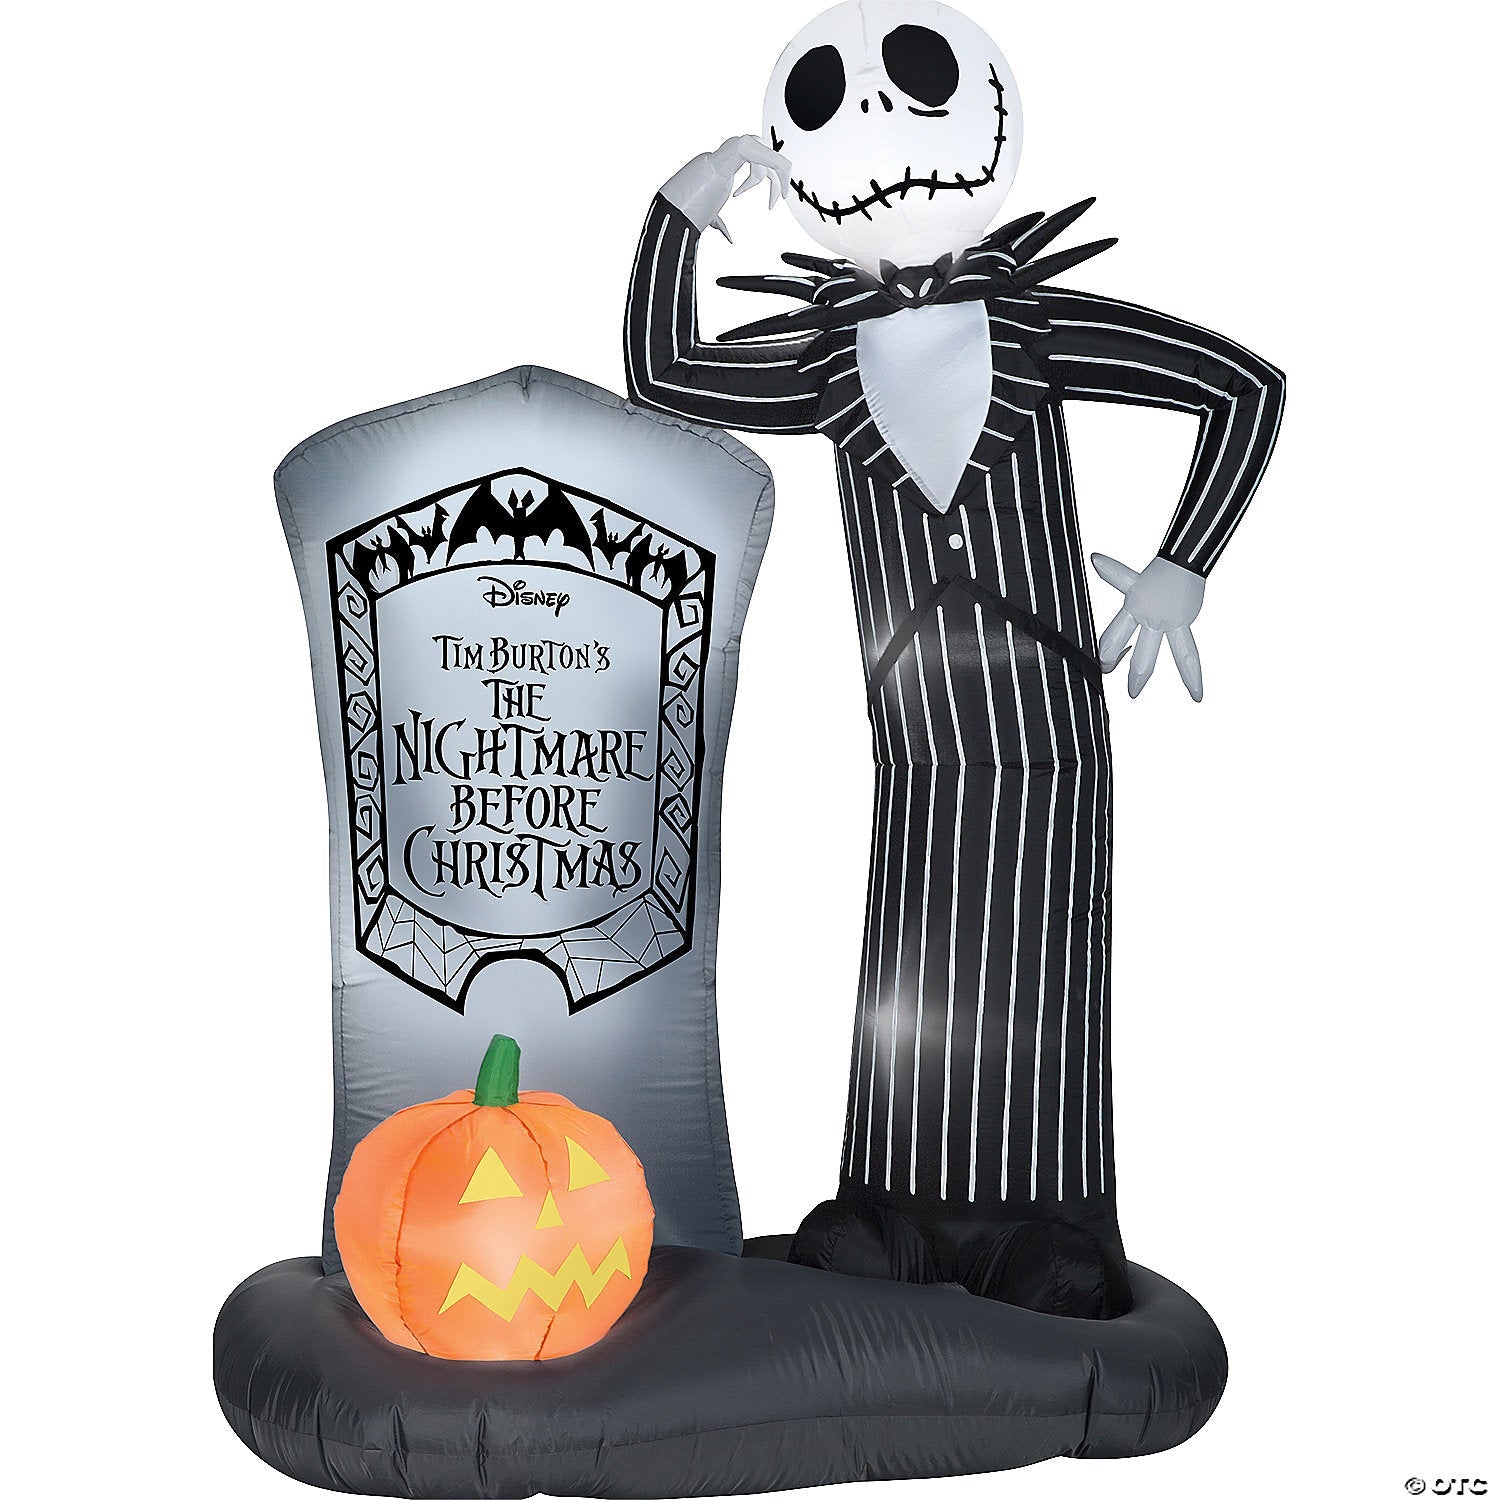 72-blow-up-inflatable-jack-skellington-with-tombstone-outdoor-halloween-yard-decoration-SS224778G-Classic Horror Shop